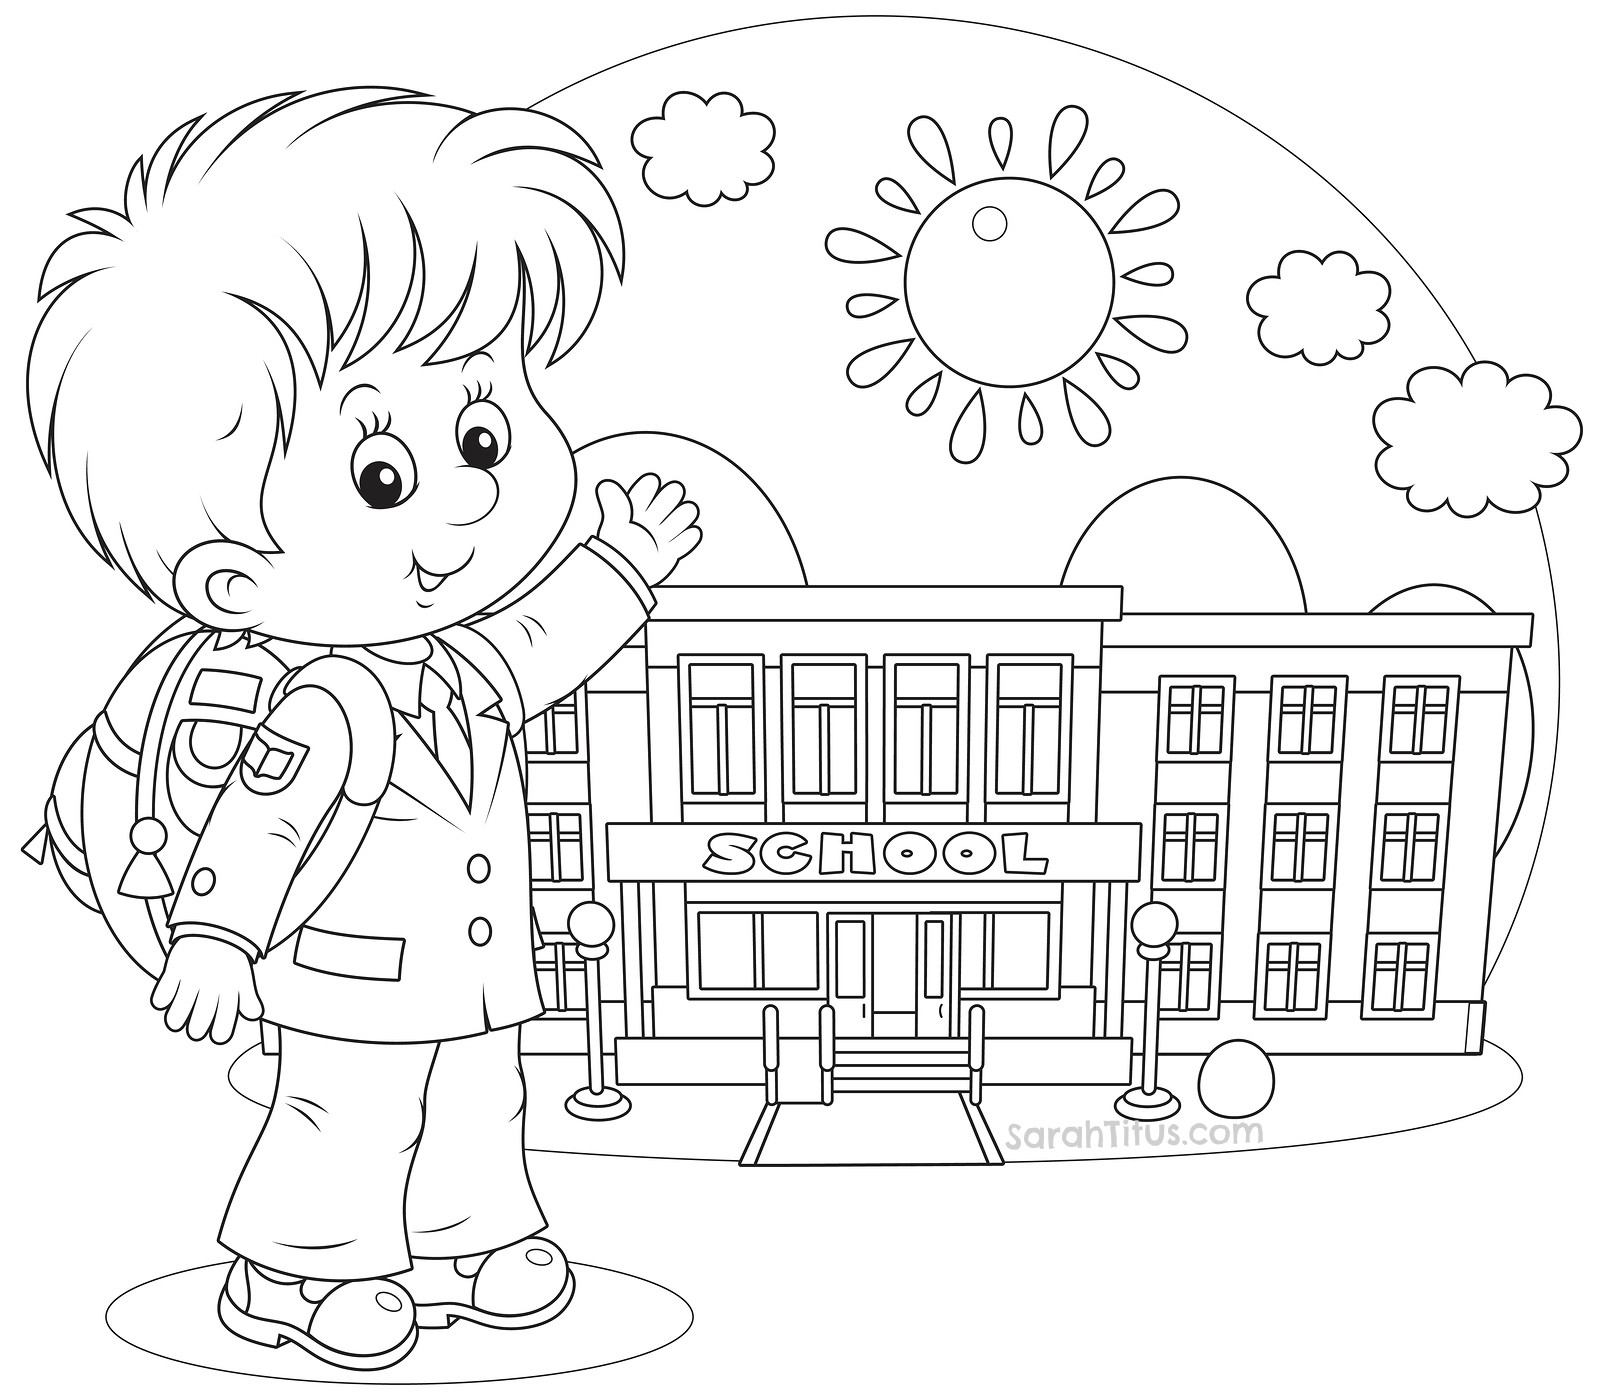 School Coloring Pages Printable
 Back to School Coloring Pages Sarah Titus